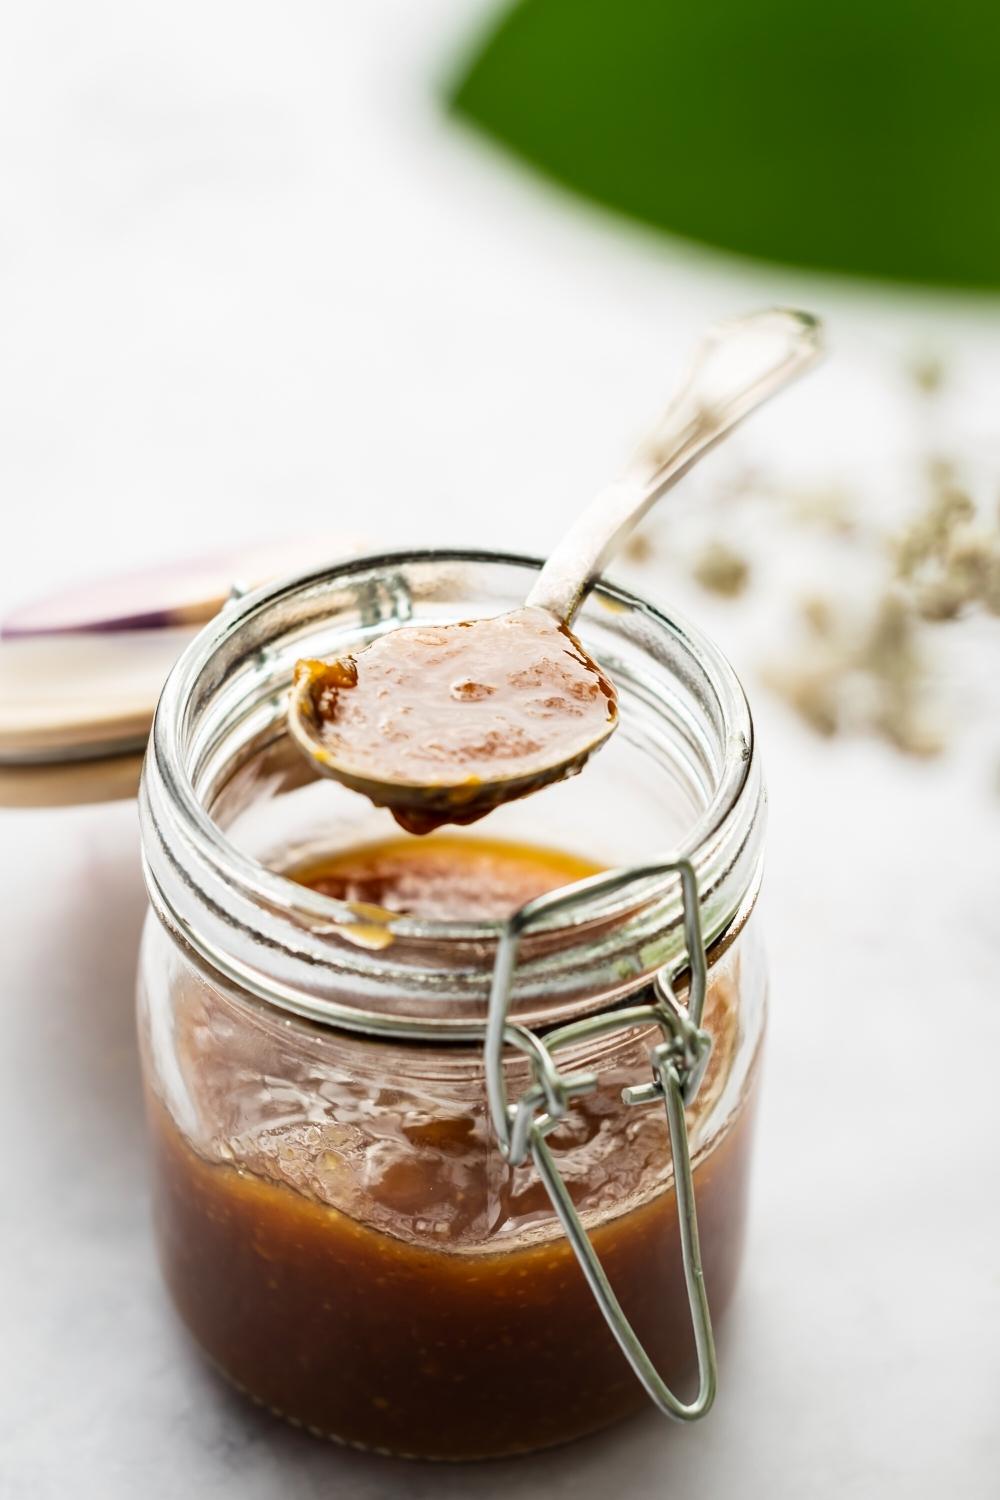 A spoon with mcdonalds sweet and sour sauce on it over a glass jar filled with the sauce.